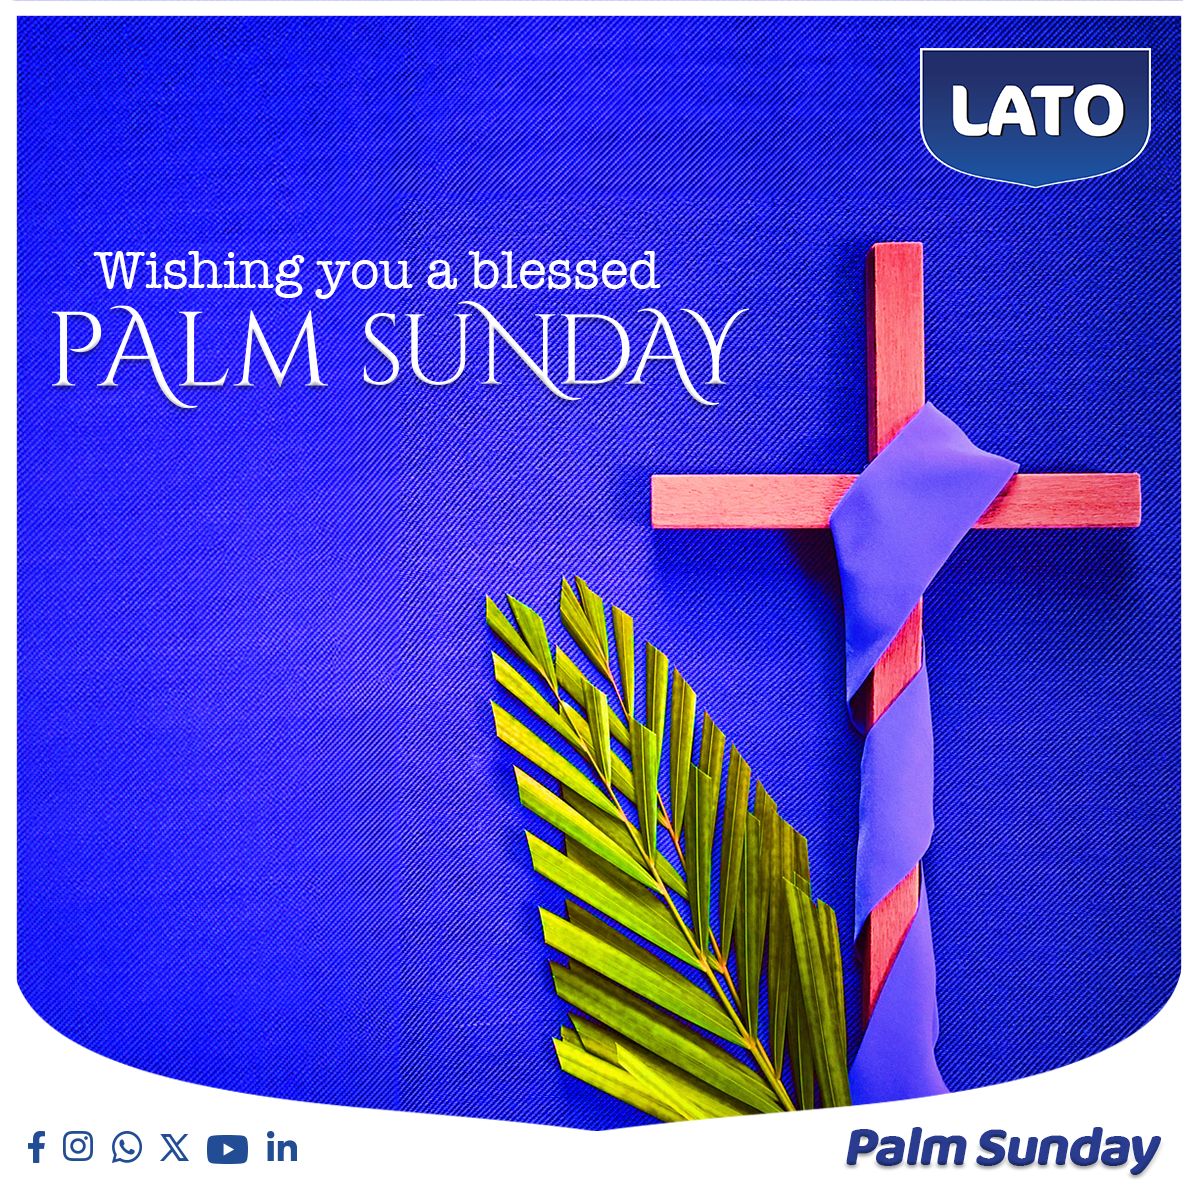 May this Palm Sunday bring joy, peace, and blessings to your heart as we celebrate the triumph of hope, love, and faith. Wishing you a blessed #PalmSunday filled with God's grace and light. #LatoMilk